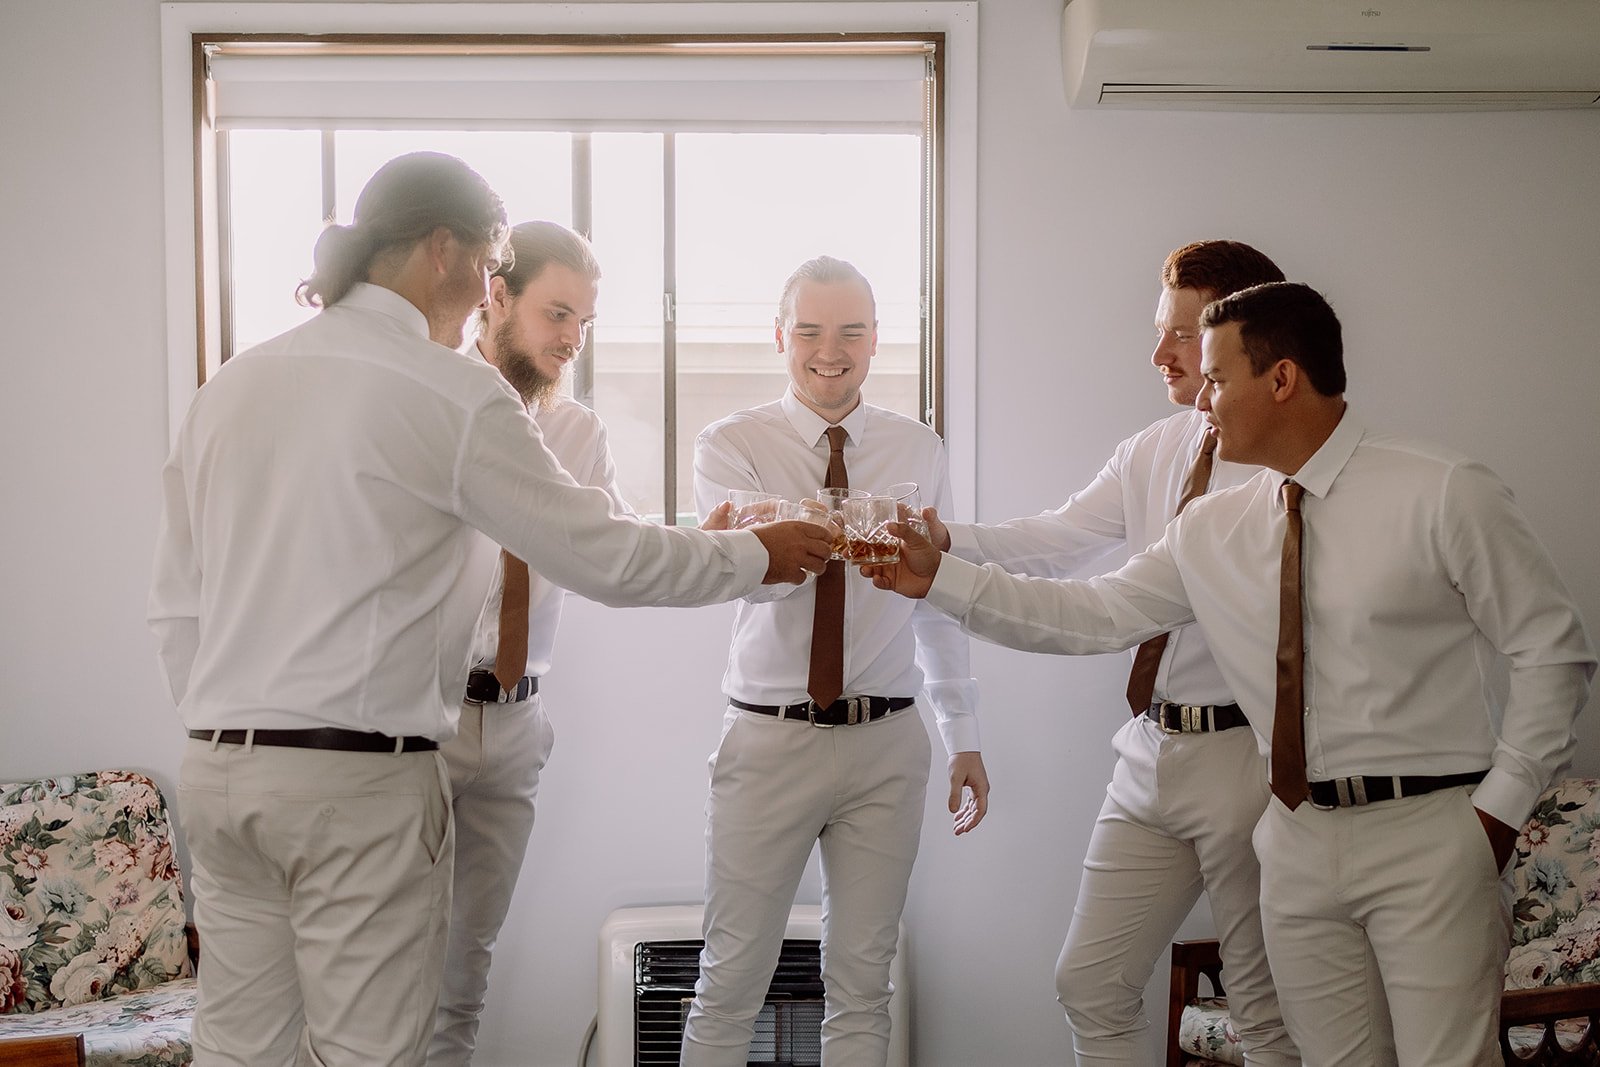 Groomsmen cheersing each other with scotch glasses